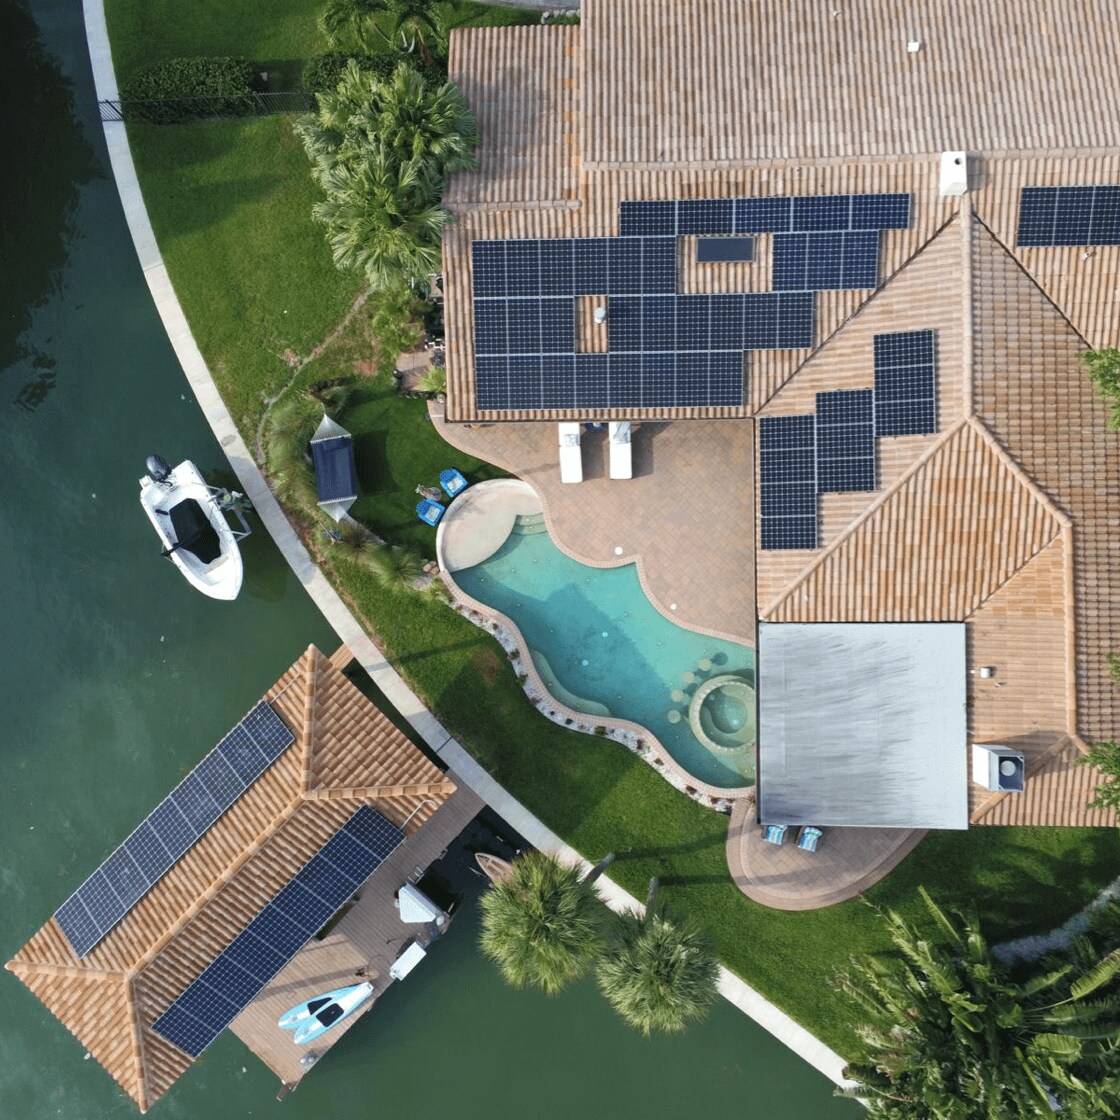 innovative home with ADT solar panels